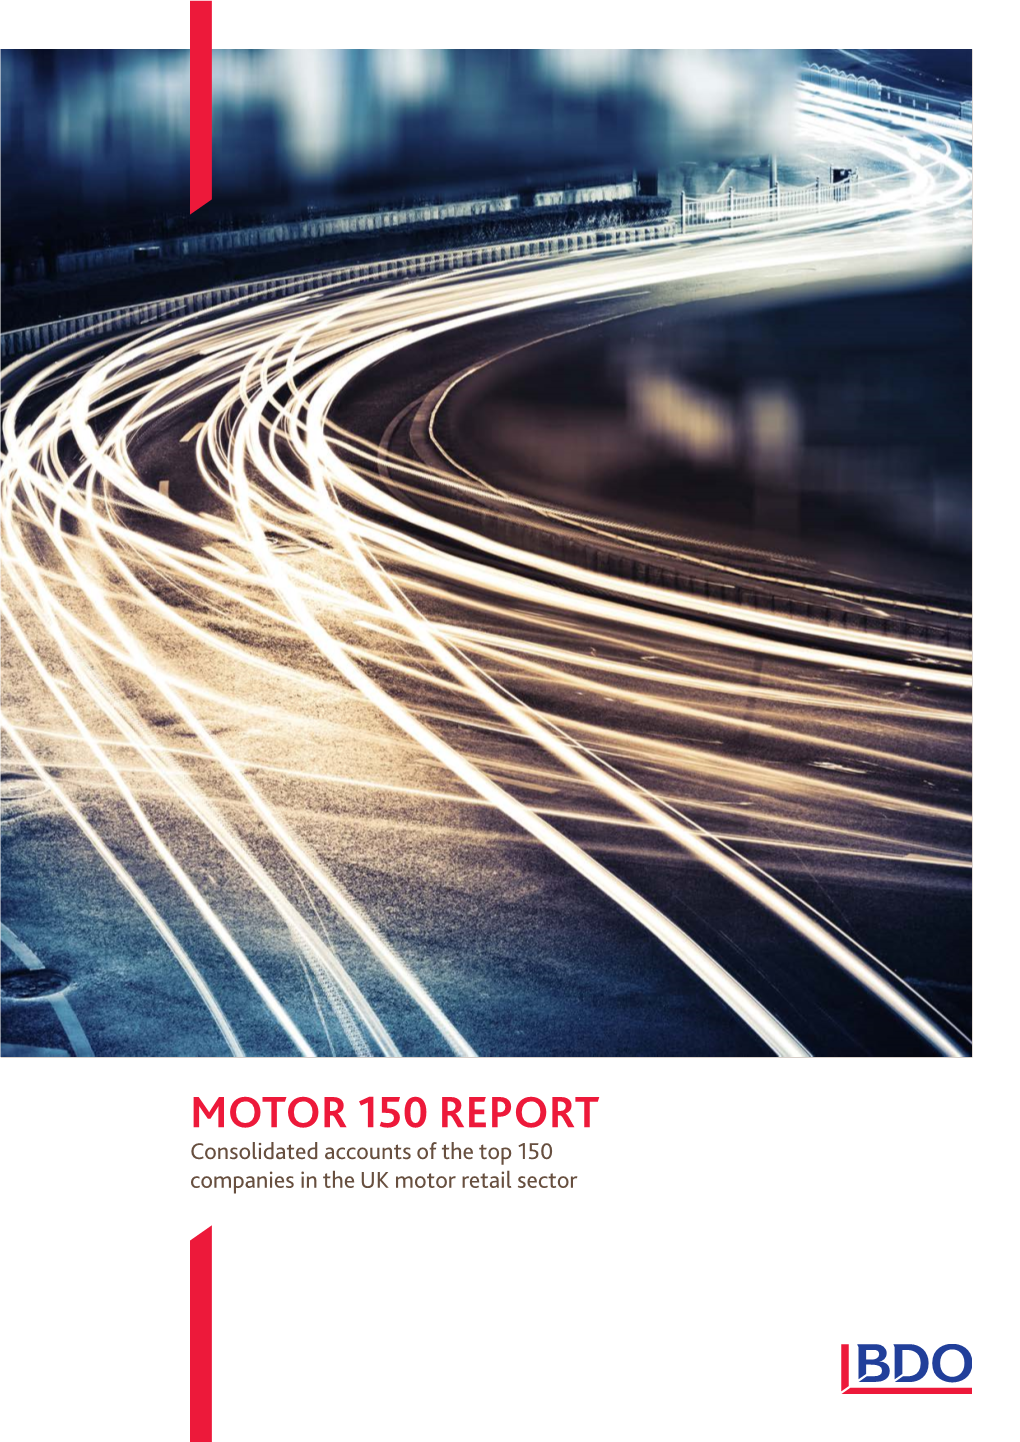 MOTOR 150 REPORT Consolidated Accounts of the Top 150 Companies in the UK Motor Retail Sector CONTENTS